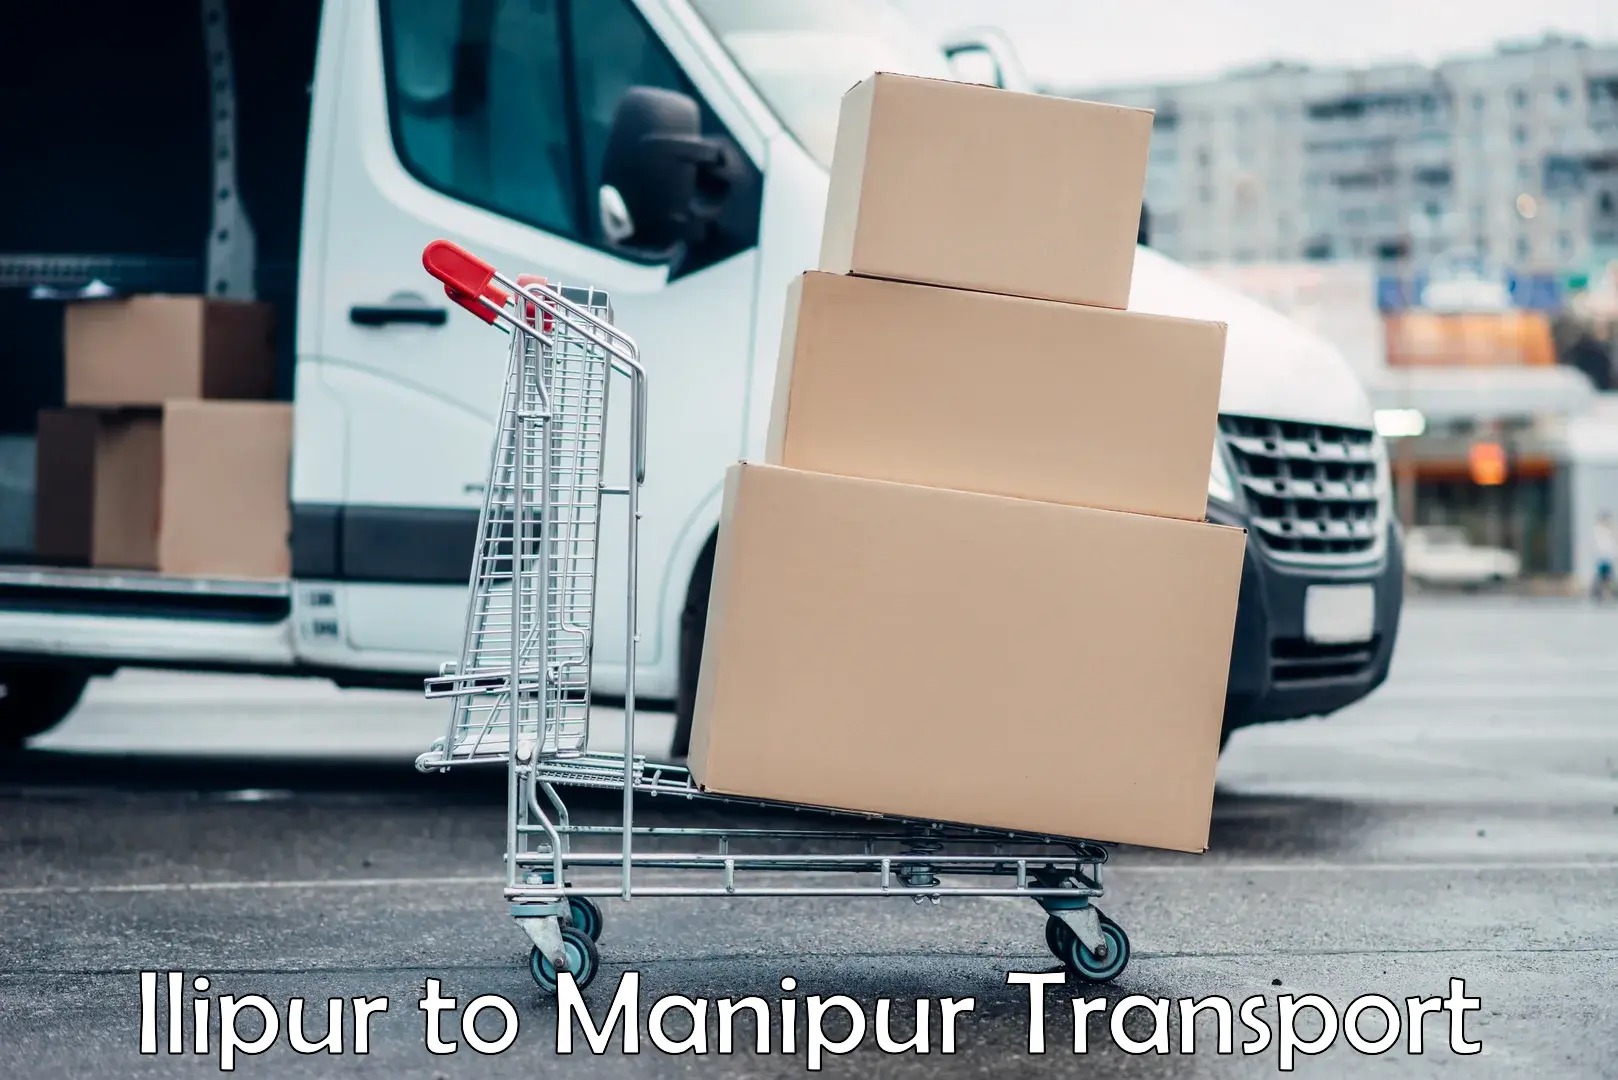 Container transport service Ilipur to Kanti